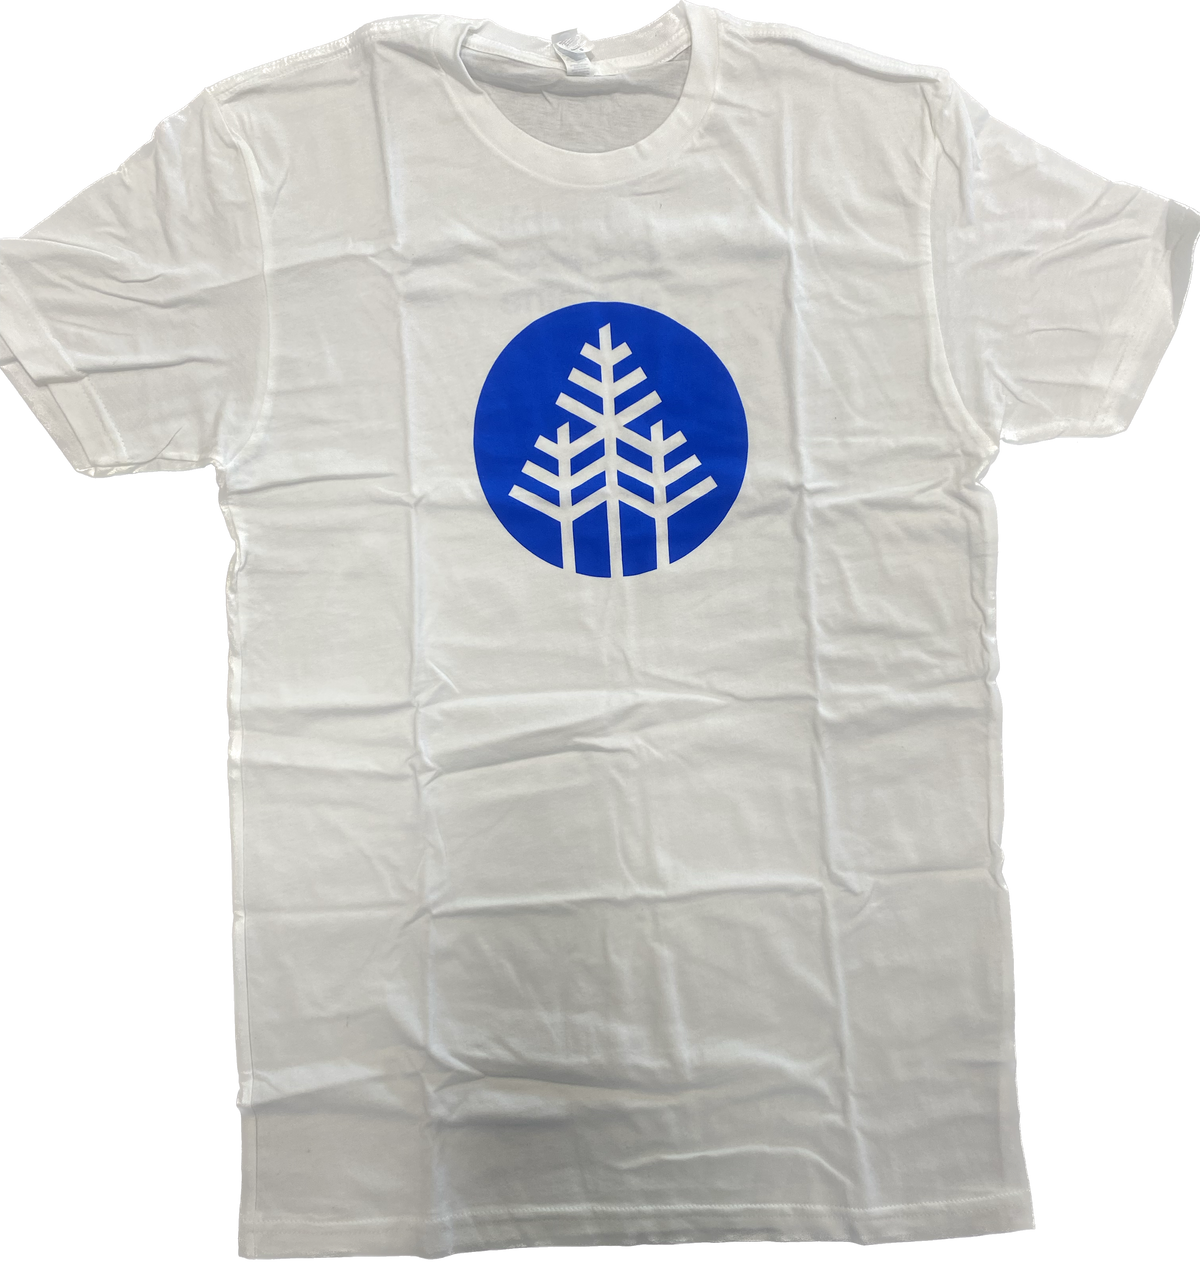 White Tshirt with Tree Stamp